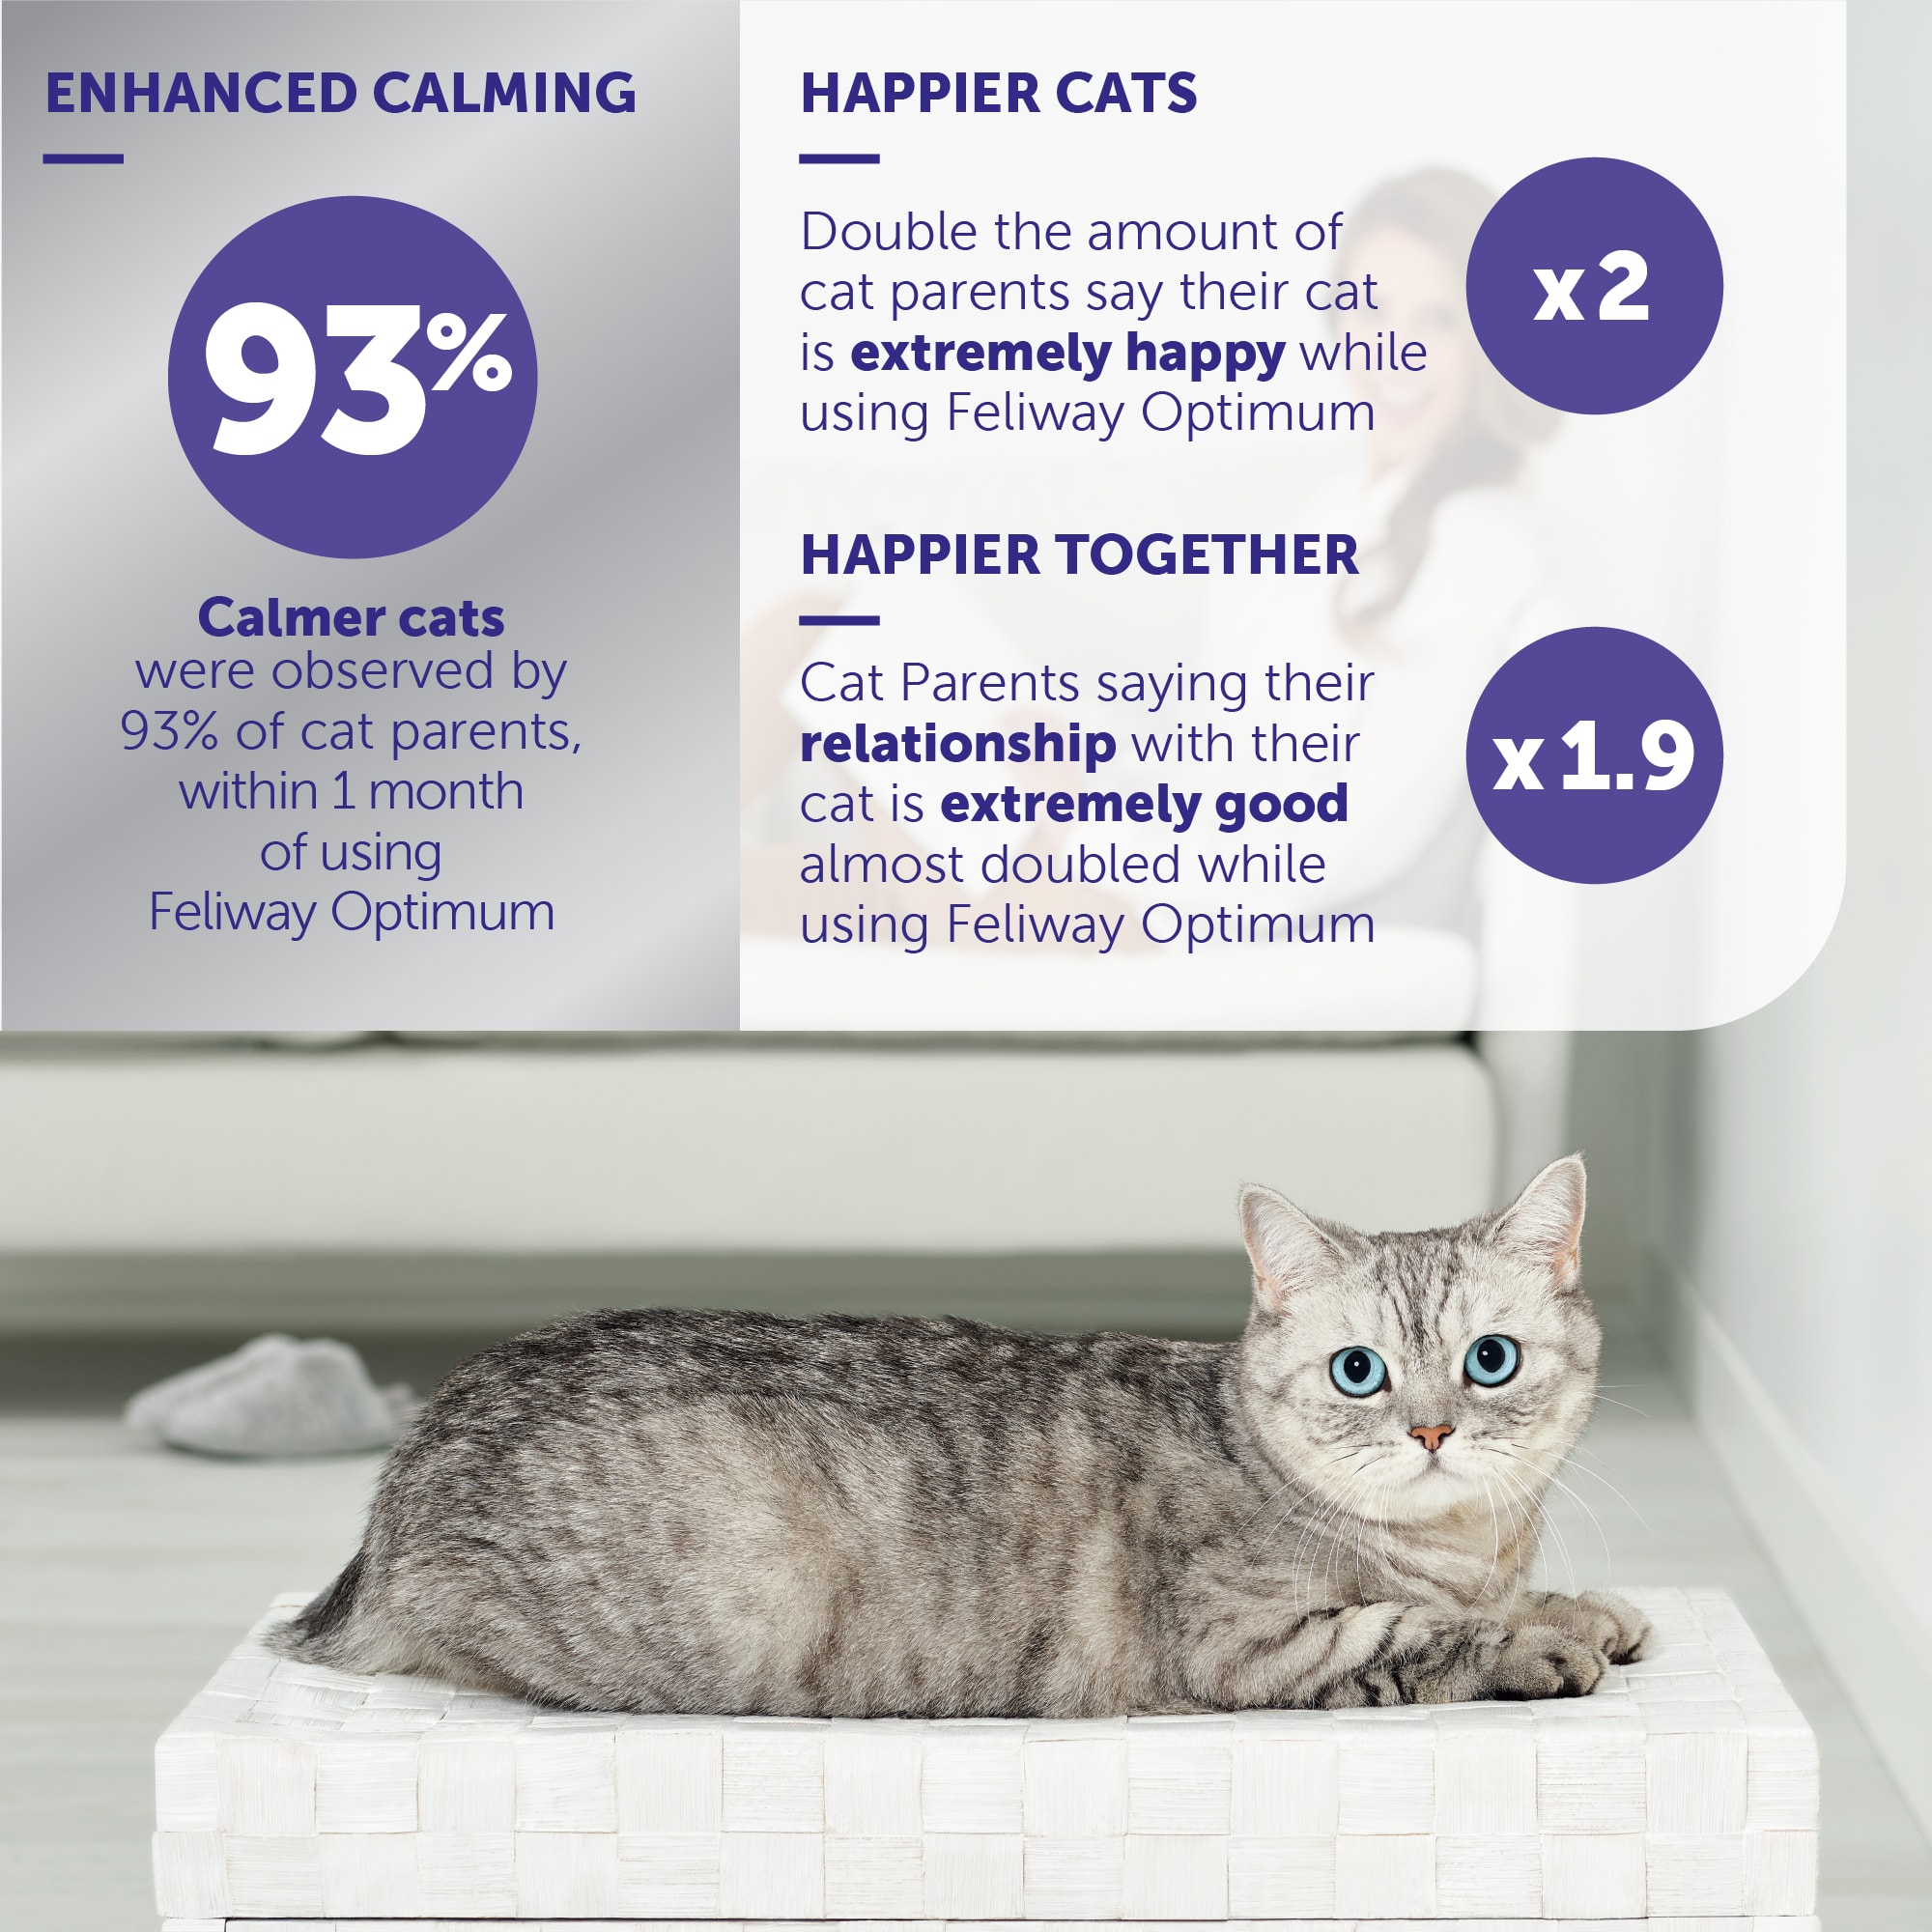 FELIWAY OPTIMUM 30 DAY DIFFUSER & REFILL – Pawesome Adventure and Sport